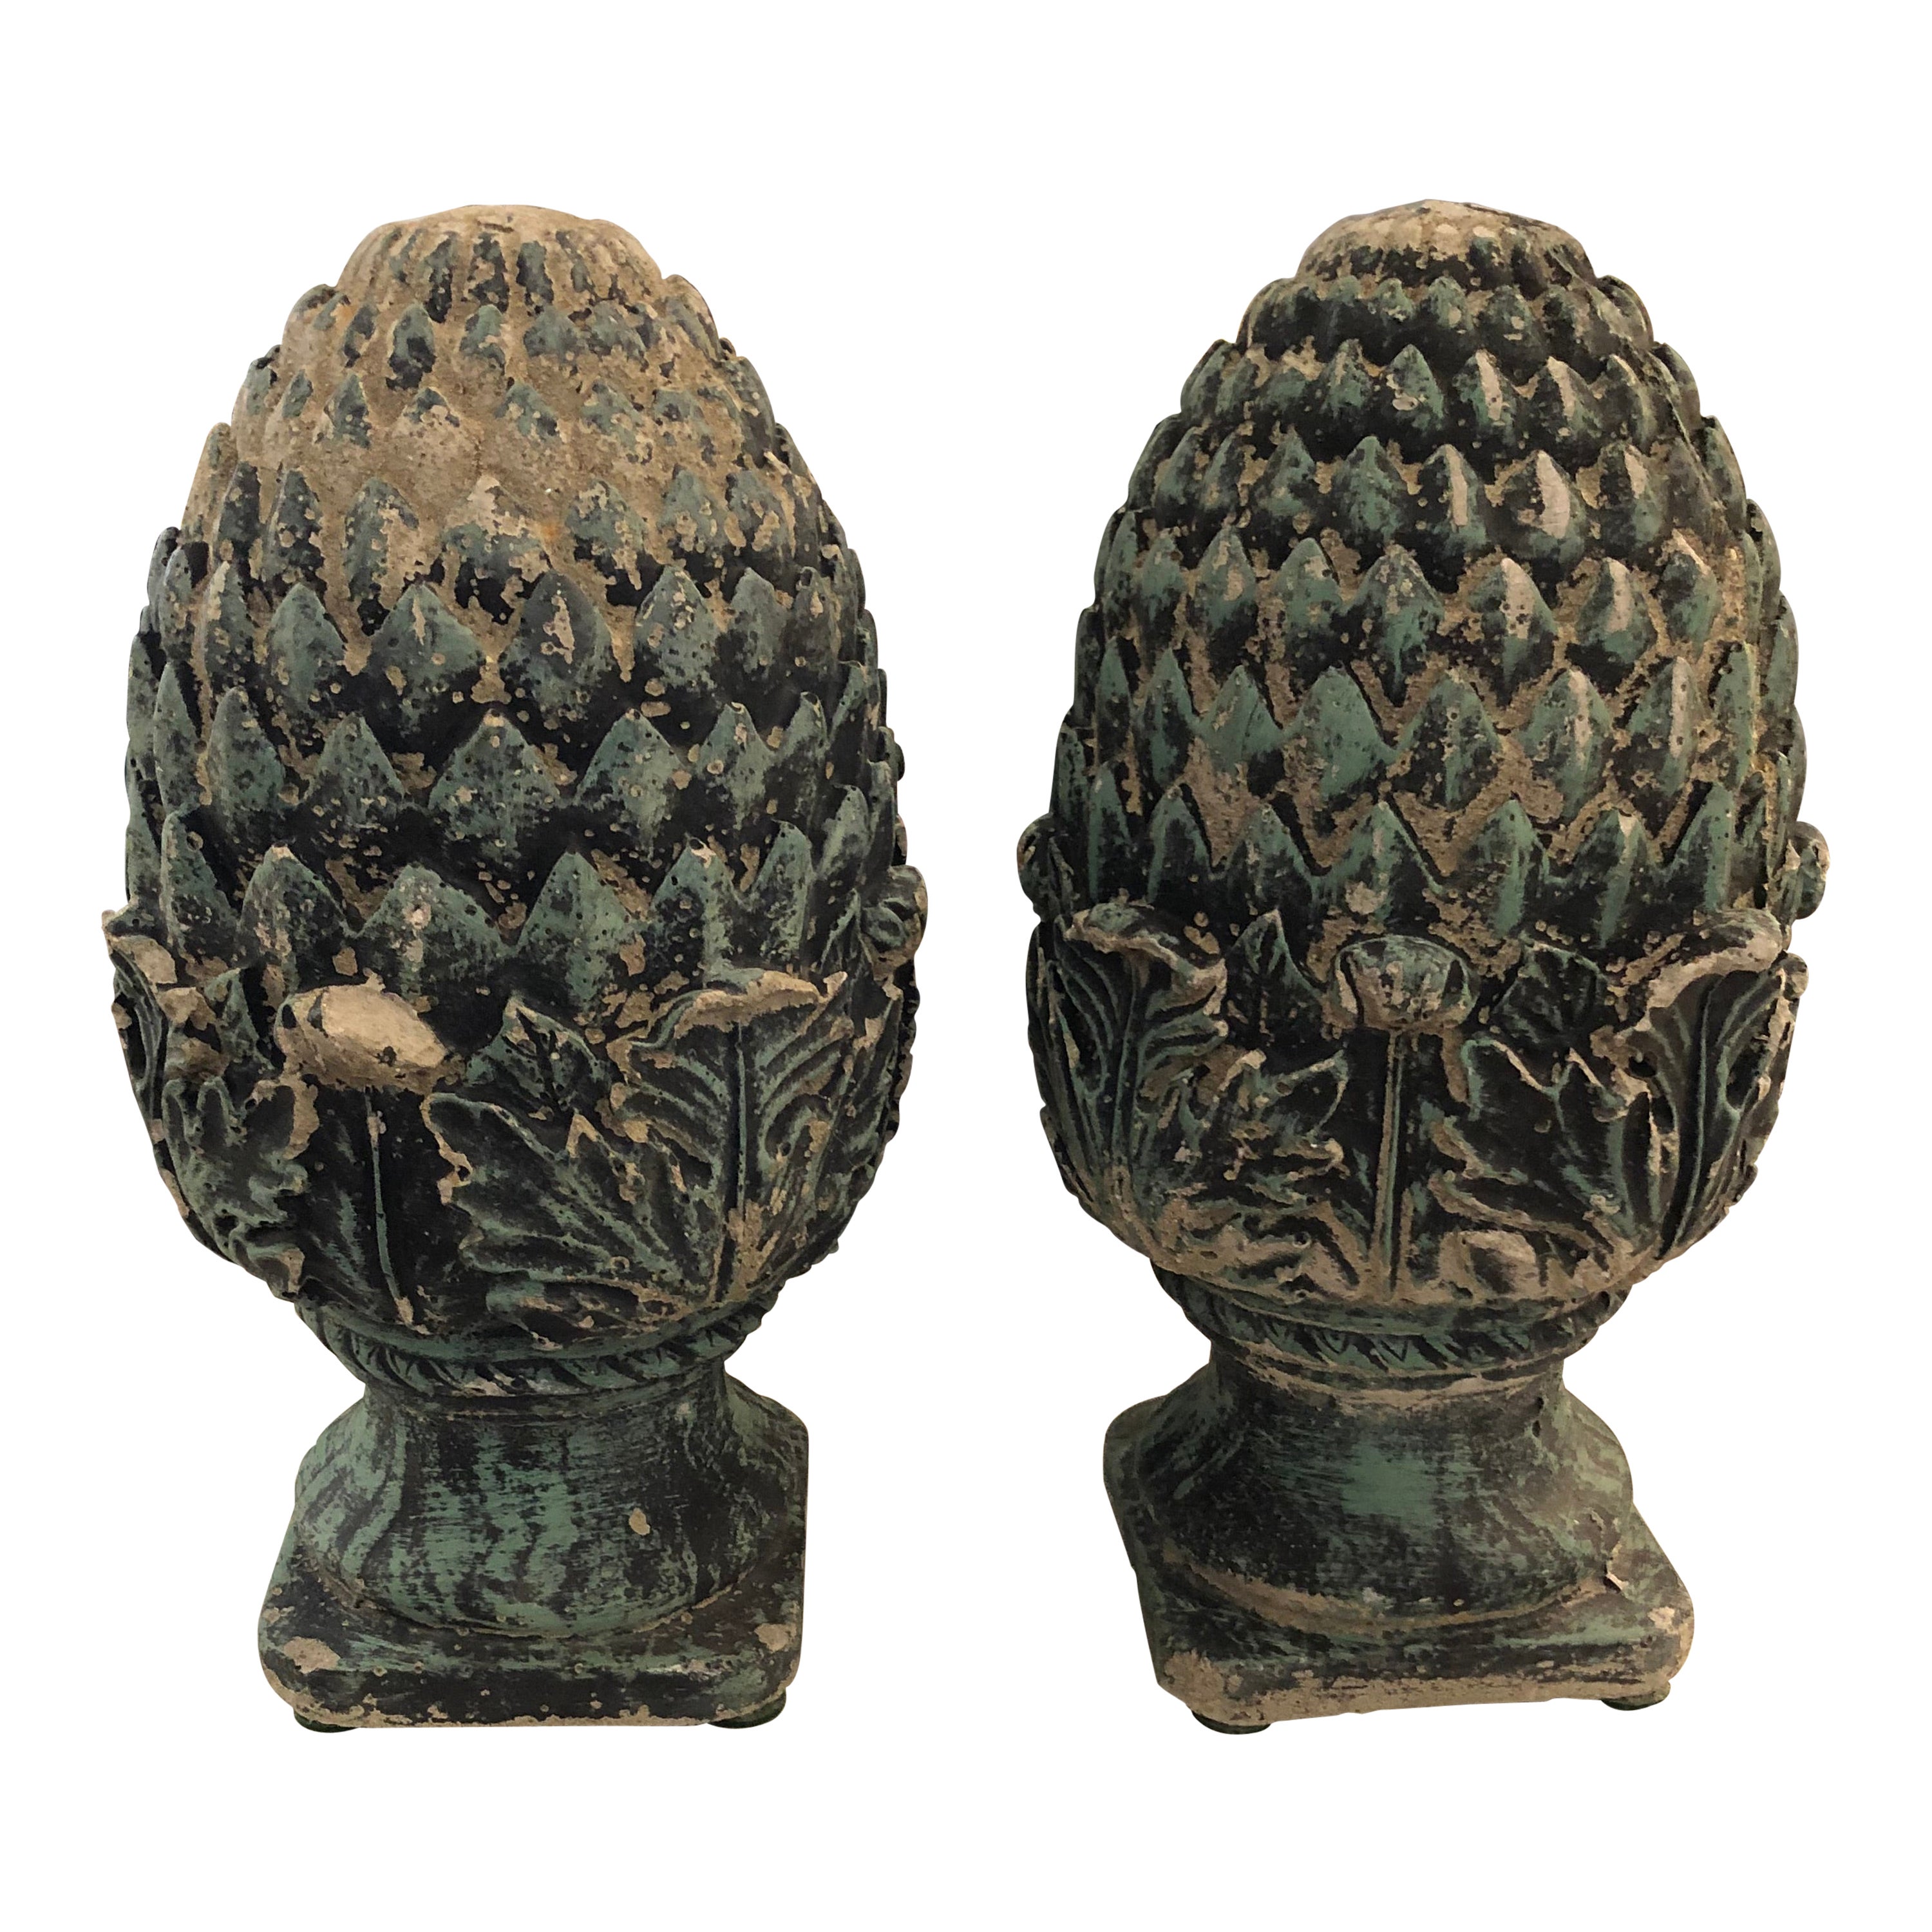 Stunning Pair of Vintage Pineapple Shaped Finial Sculptures For Sale